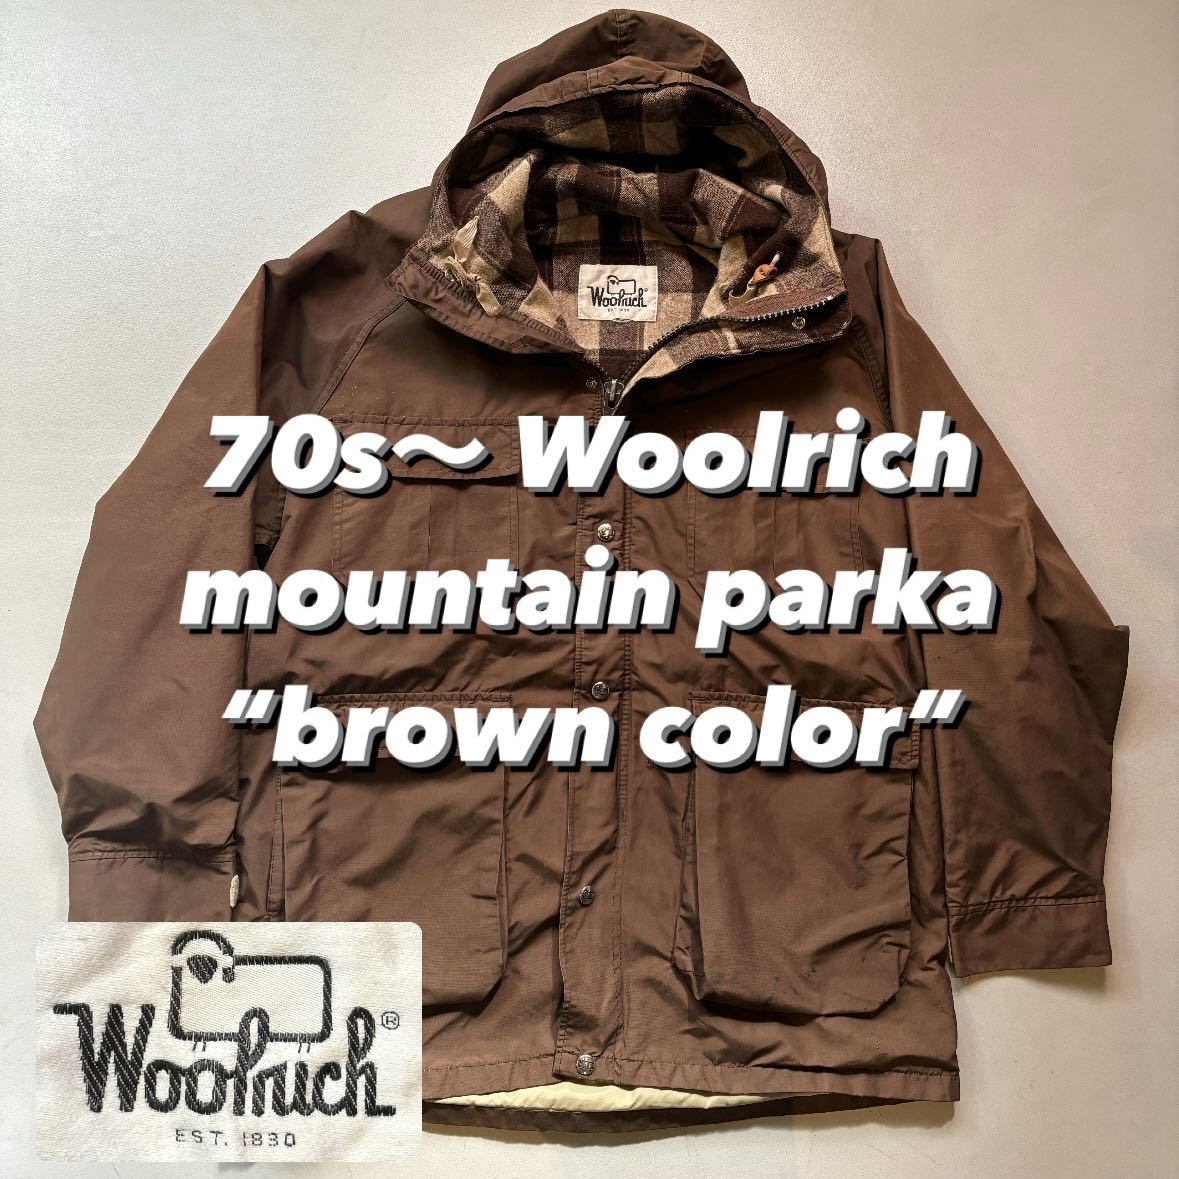 70s〜 Woolrich mountain parka “brown color” 70年代 ウールリッチ マウンテンパーカ 茶色